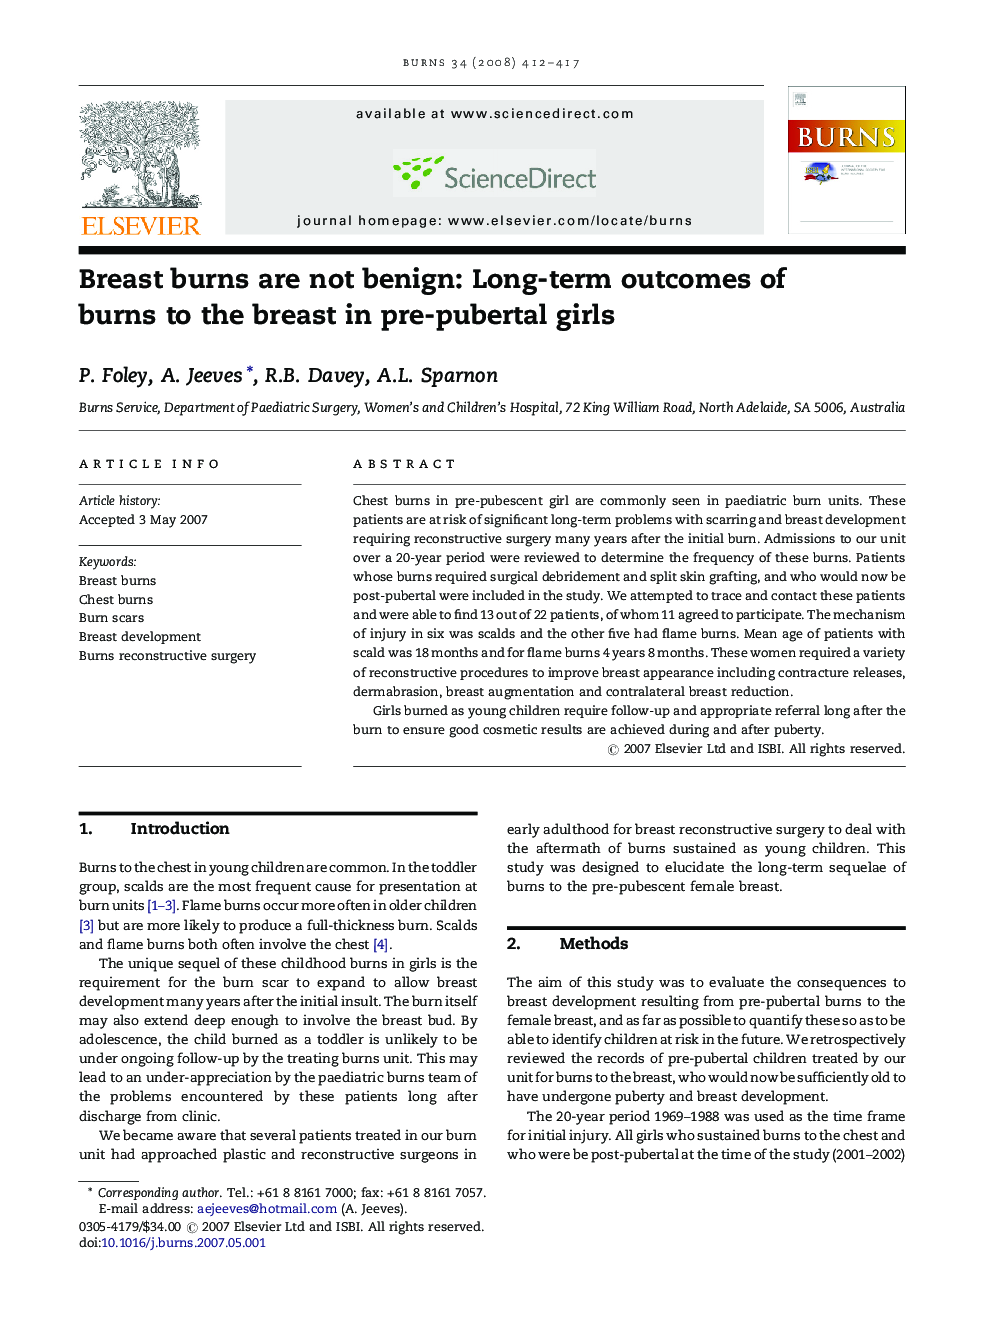 Breast burns are not benign: Long-term outcomes of burns to the breast in pre-pubertal girls